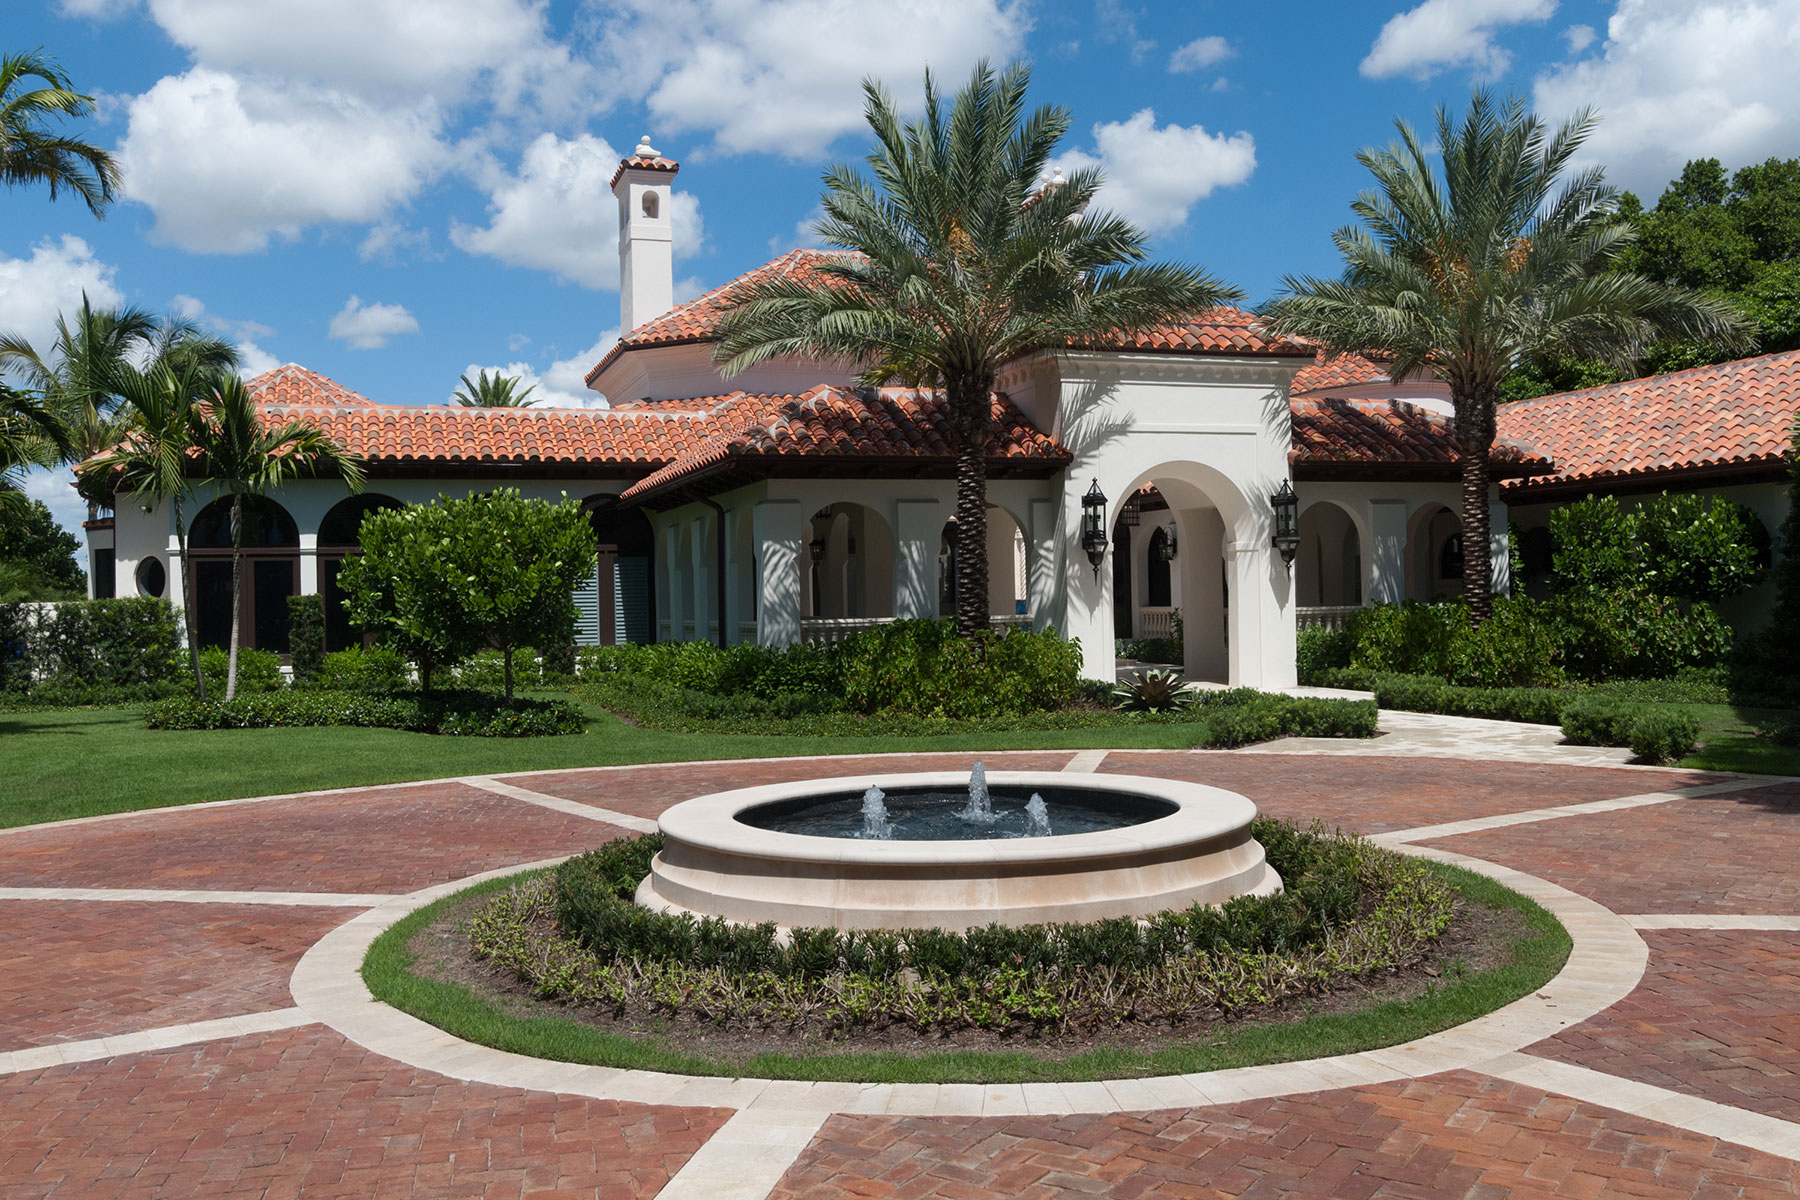 A round drive greets visitors to this renovated Palm Beach estate